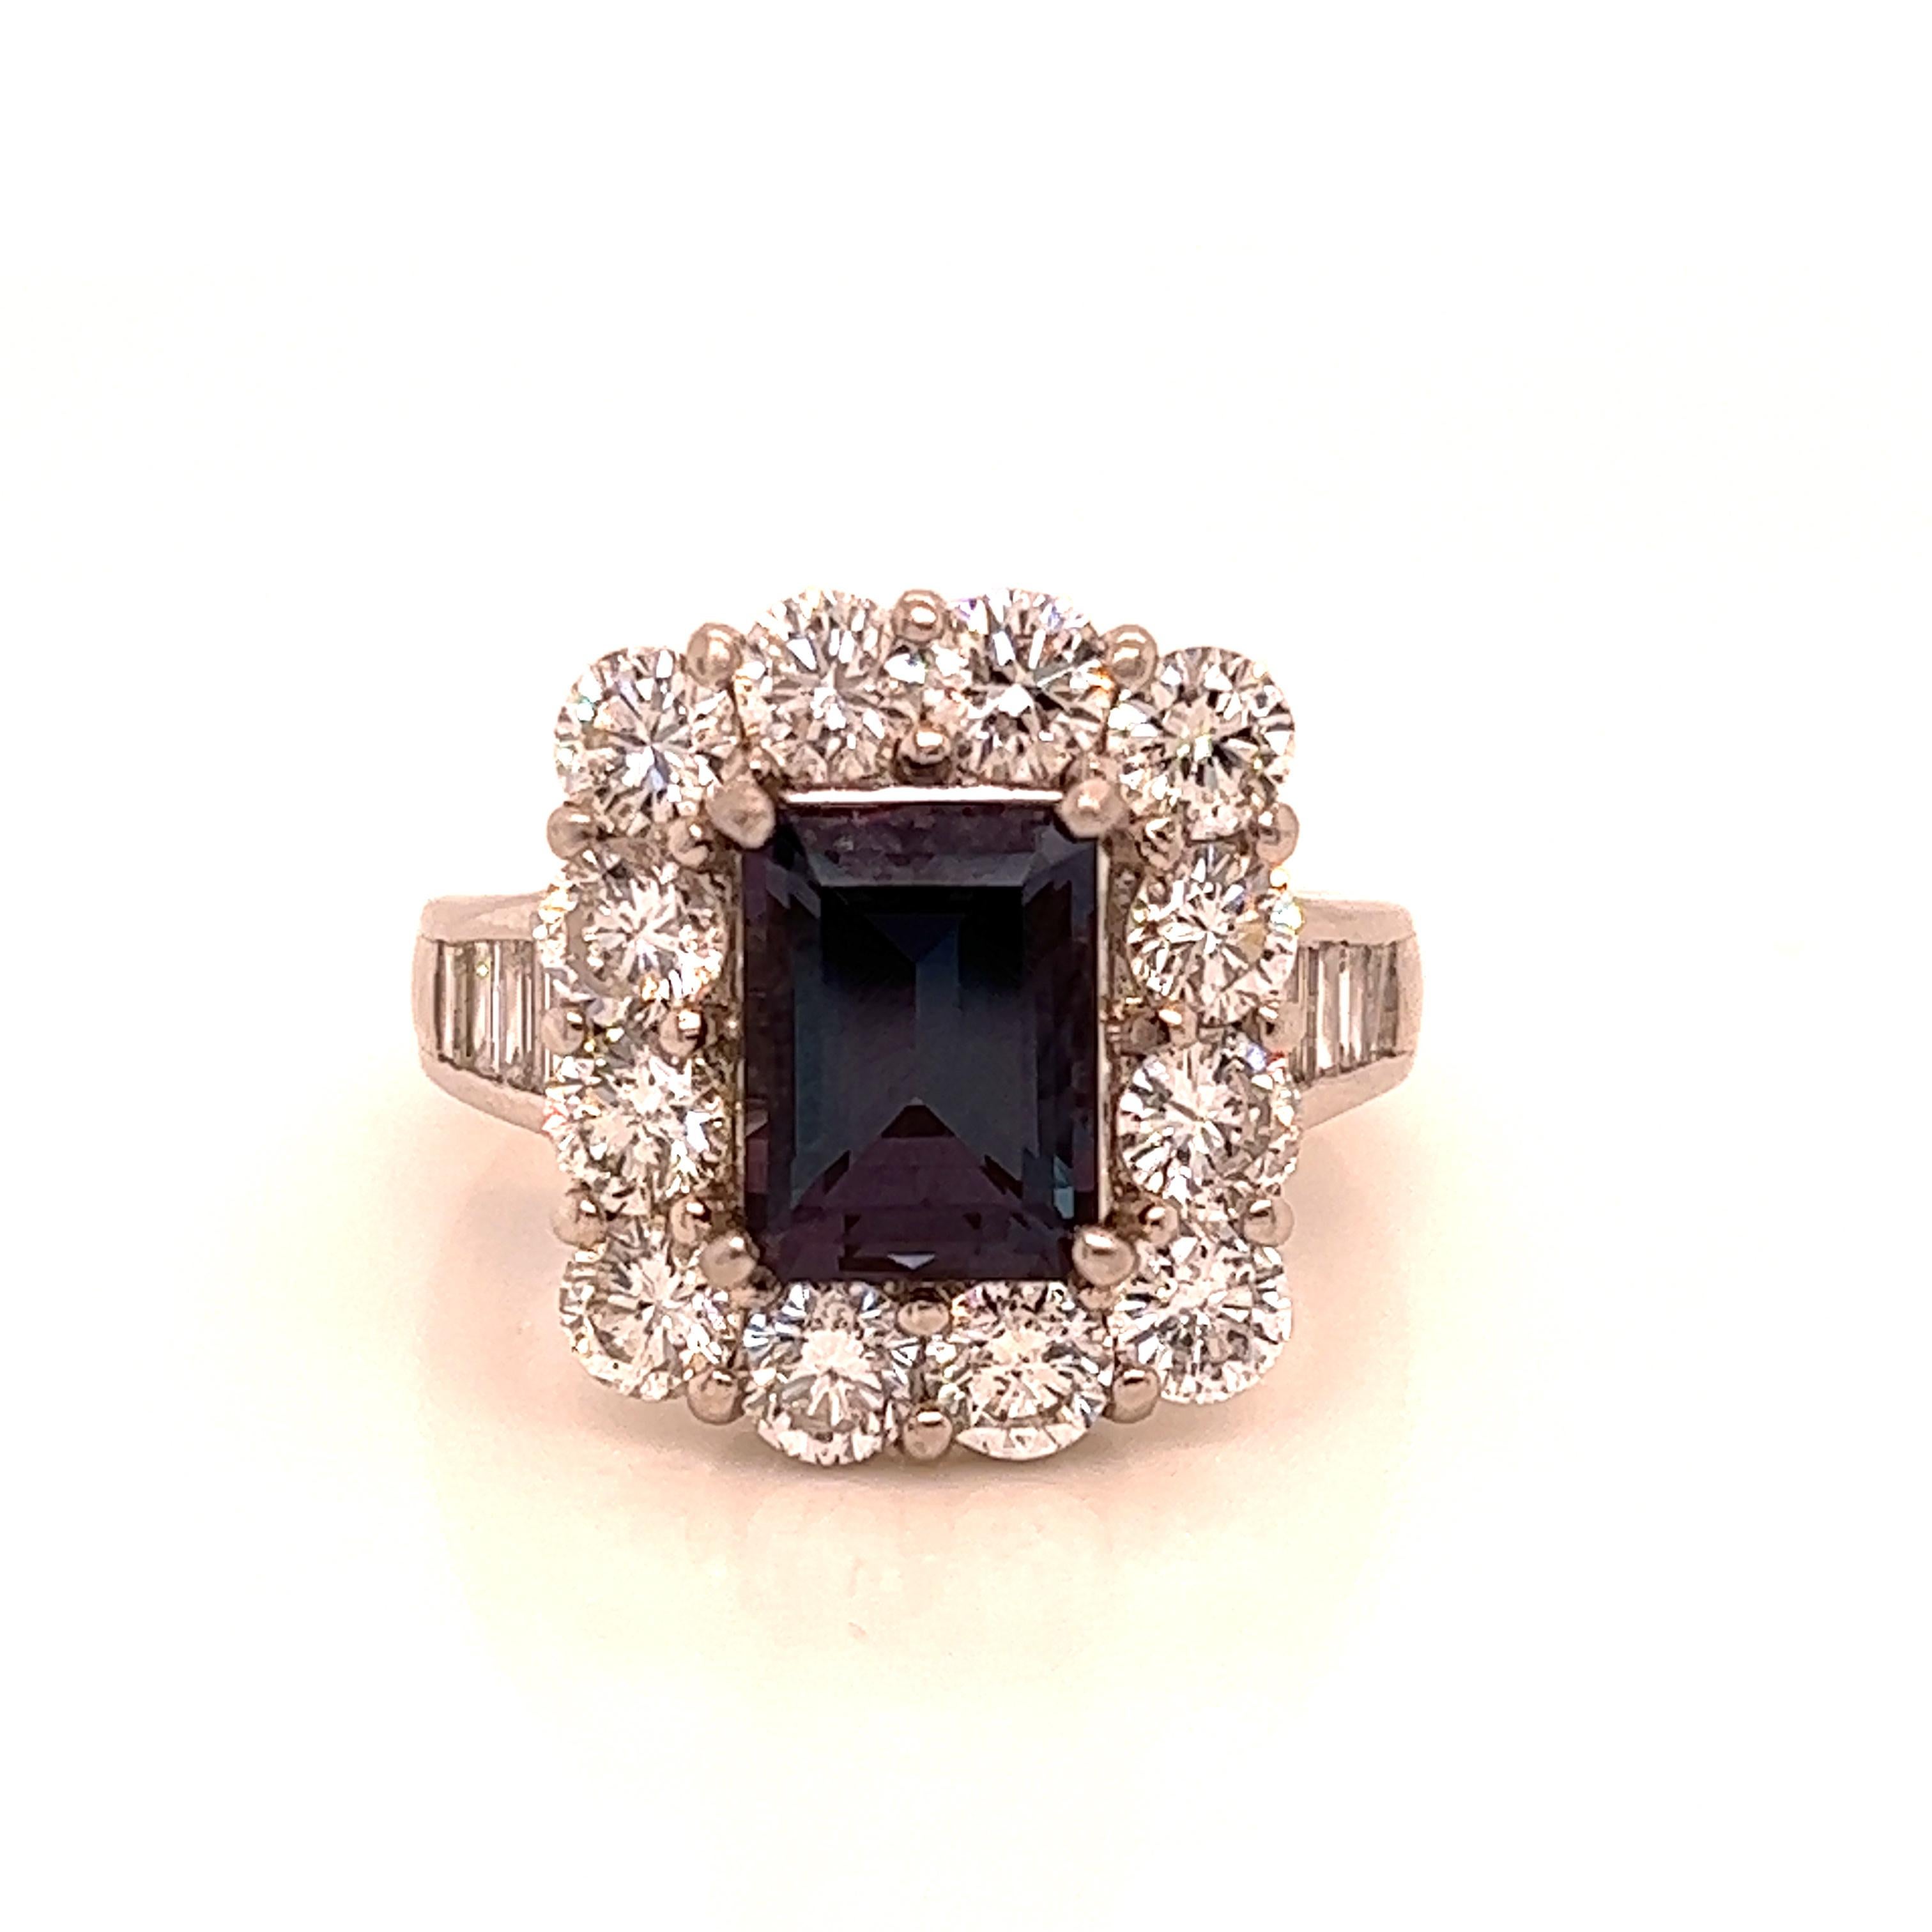 This is a gorgeous natural AAA quality Emerald Alexandrite surrounded by dainty diamonds that is set in a vintage platinum setting. This ring features a natural 2.57 carat Emerald alexandrite that is certified by the Gemological Institute of America